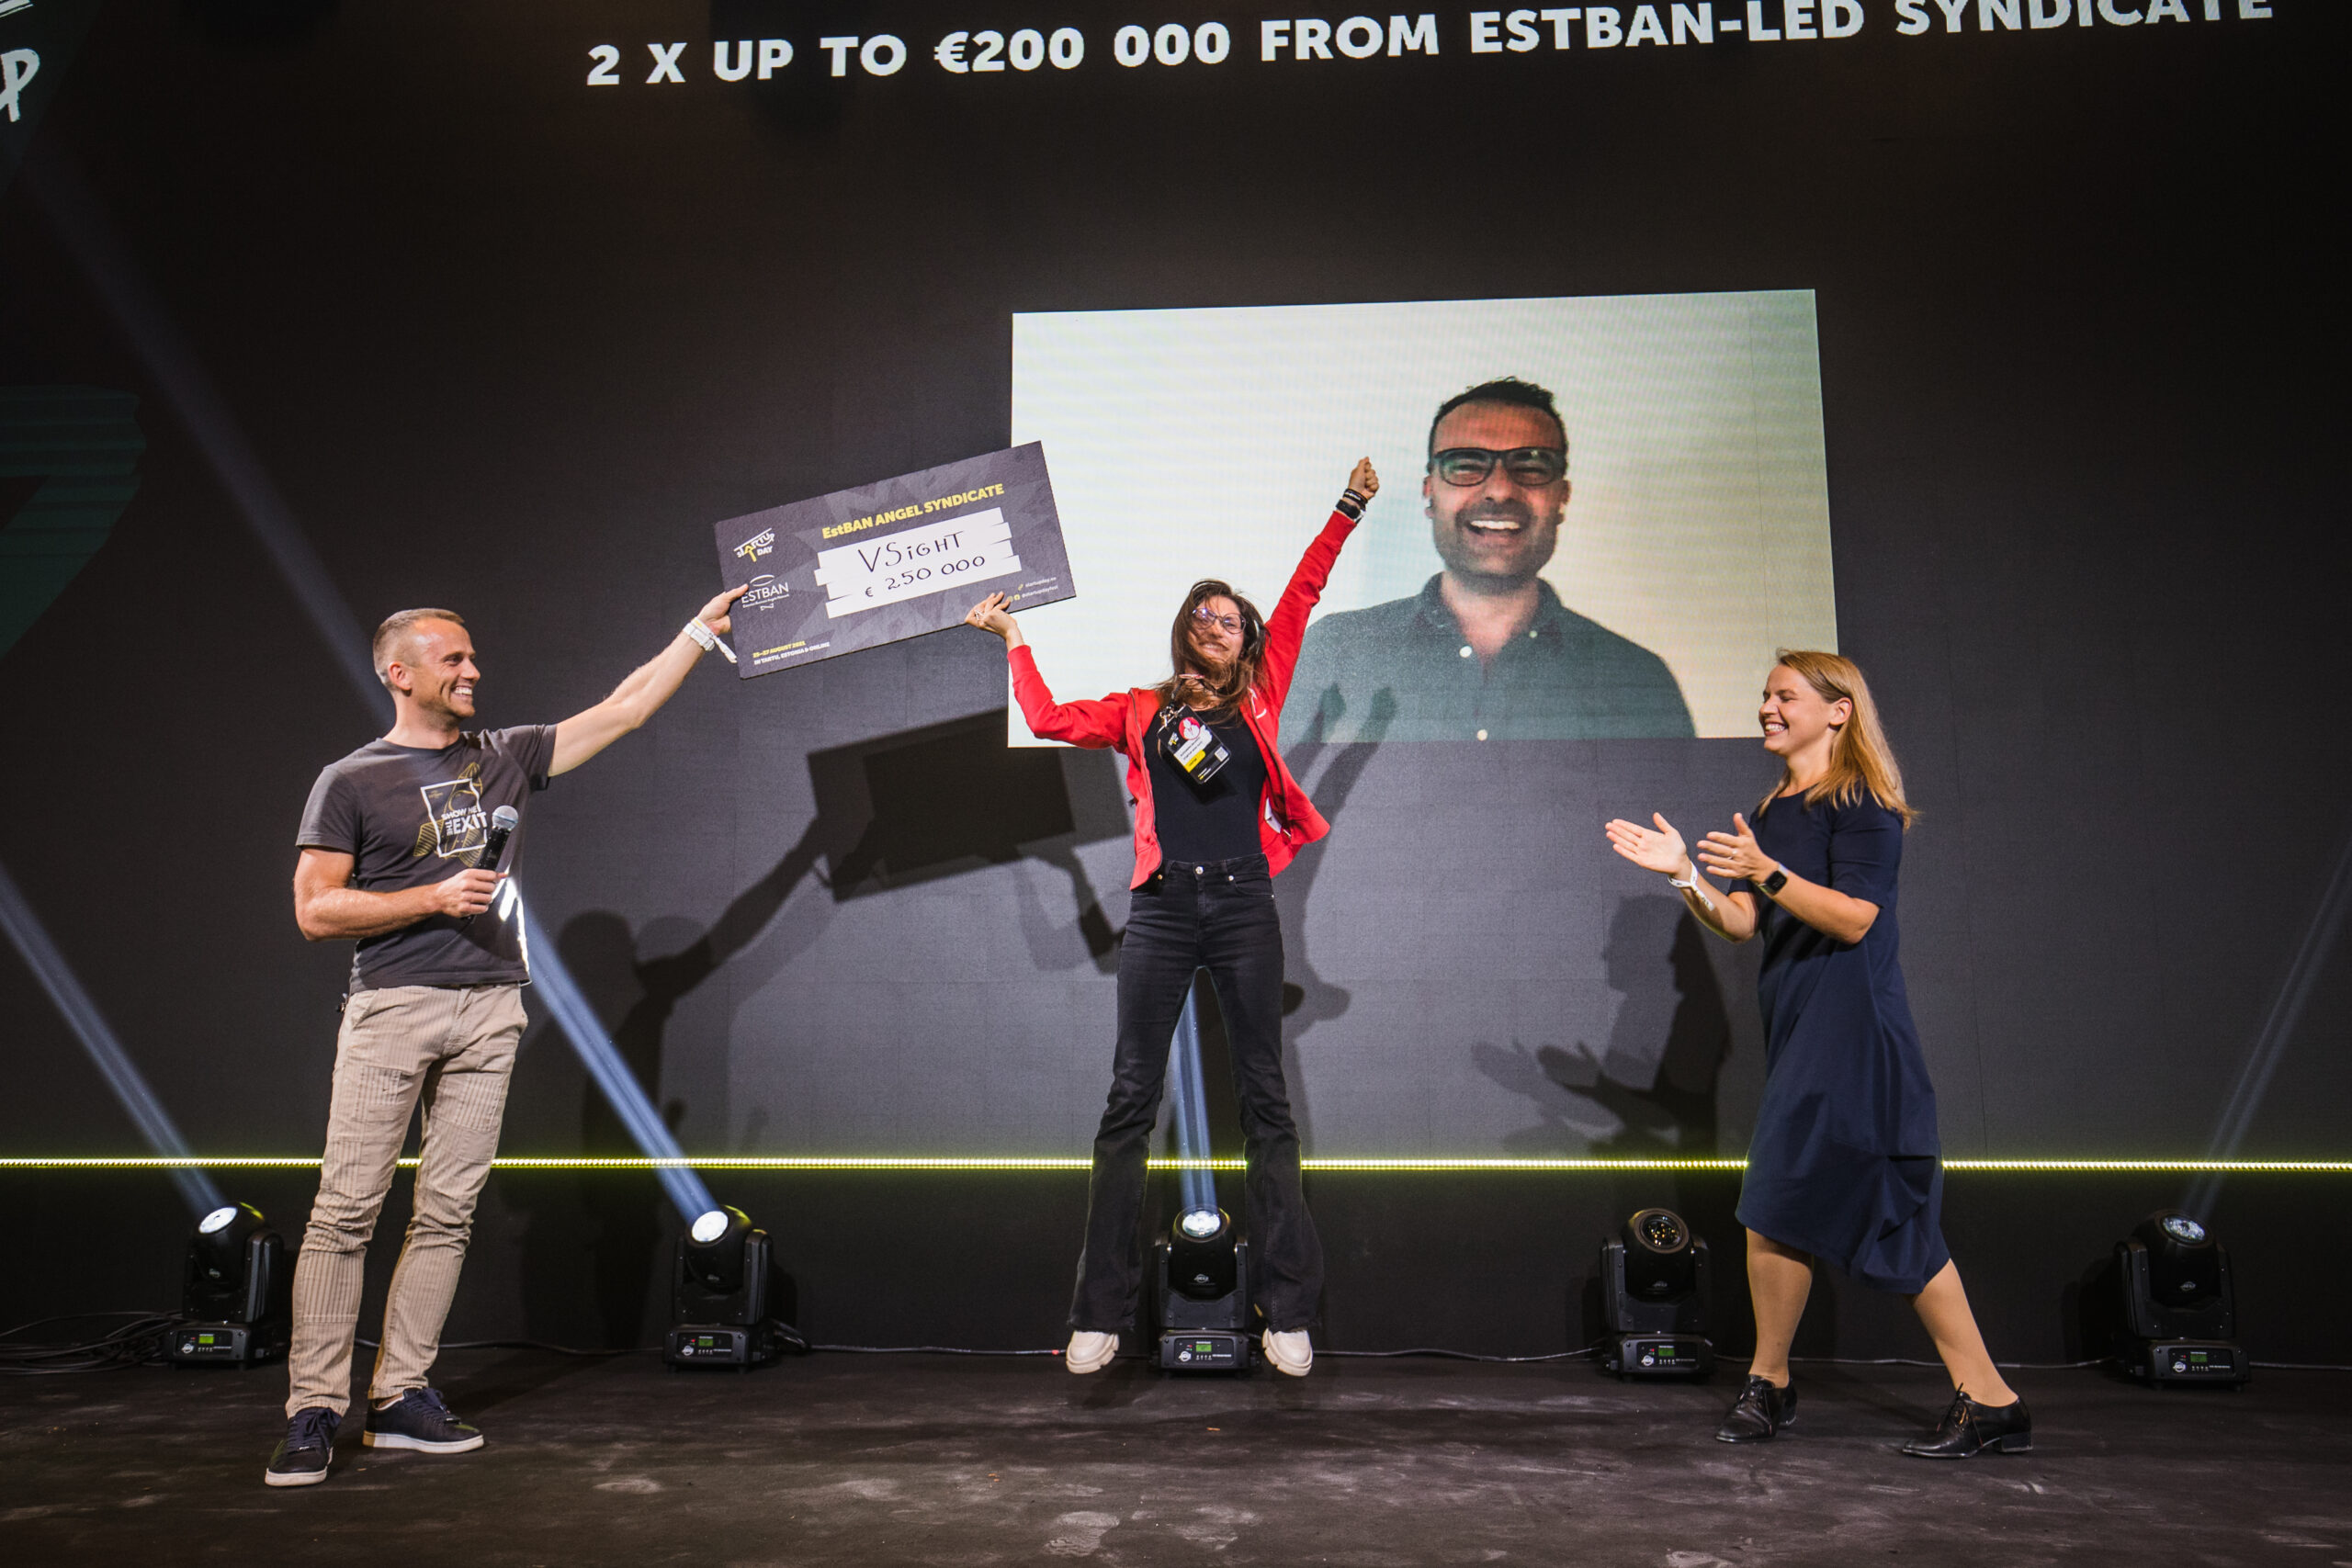 sTARTUp Pitching Powered by EstBAN – the winners have been announced!